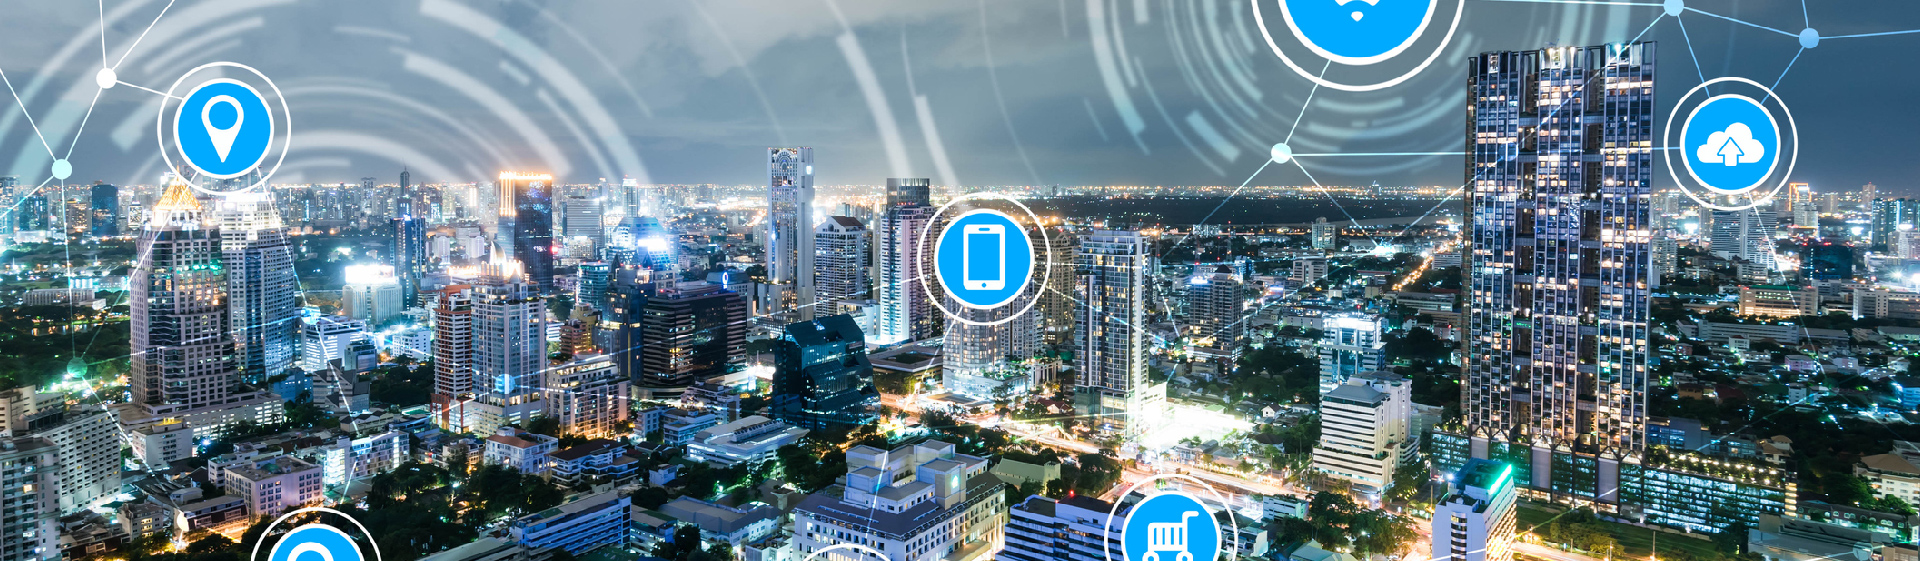 IoT Approach to Managing Highway Assets